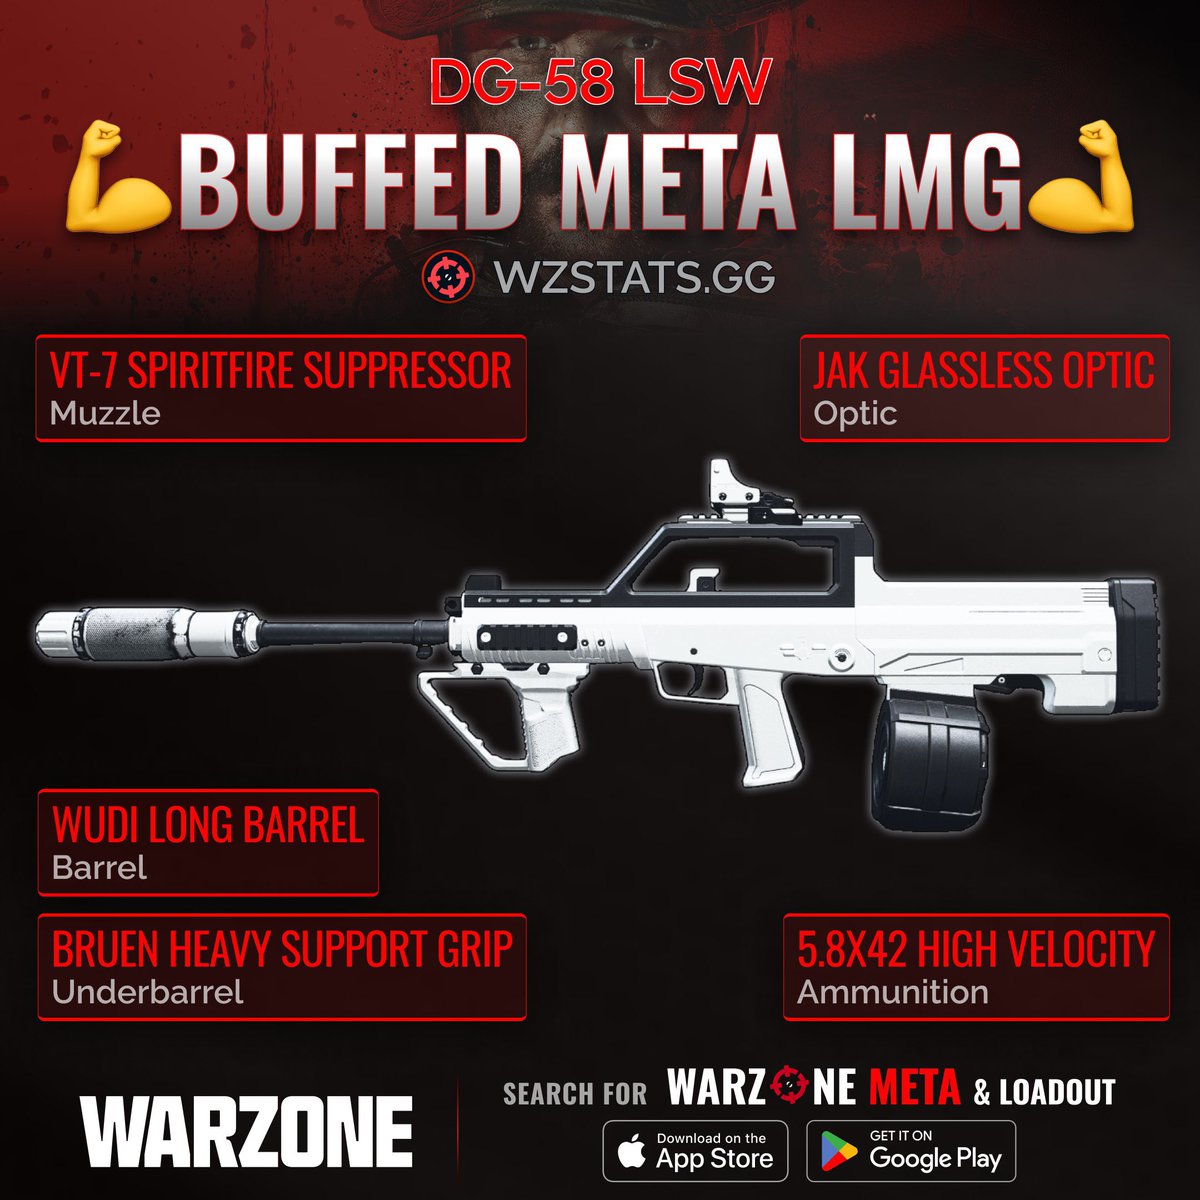 ‼️🚨 BUFFED META DG-58 LSW IN WZ 🚨‼️

💪 The BUFFED DG-58 LSW is 100% META in #Warzone!

🥇 Even better than the SVA 545 if you don’t like Burst Guns!

📊One of the Fastest TTKs in game!

Our loadout details:
✅ Very Easy To Use
✅ INSANE 1300+ m/s Bullet Velocity
✅ Fast Reload